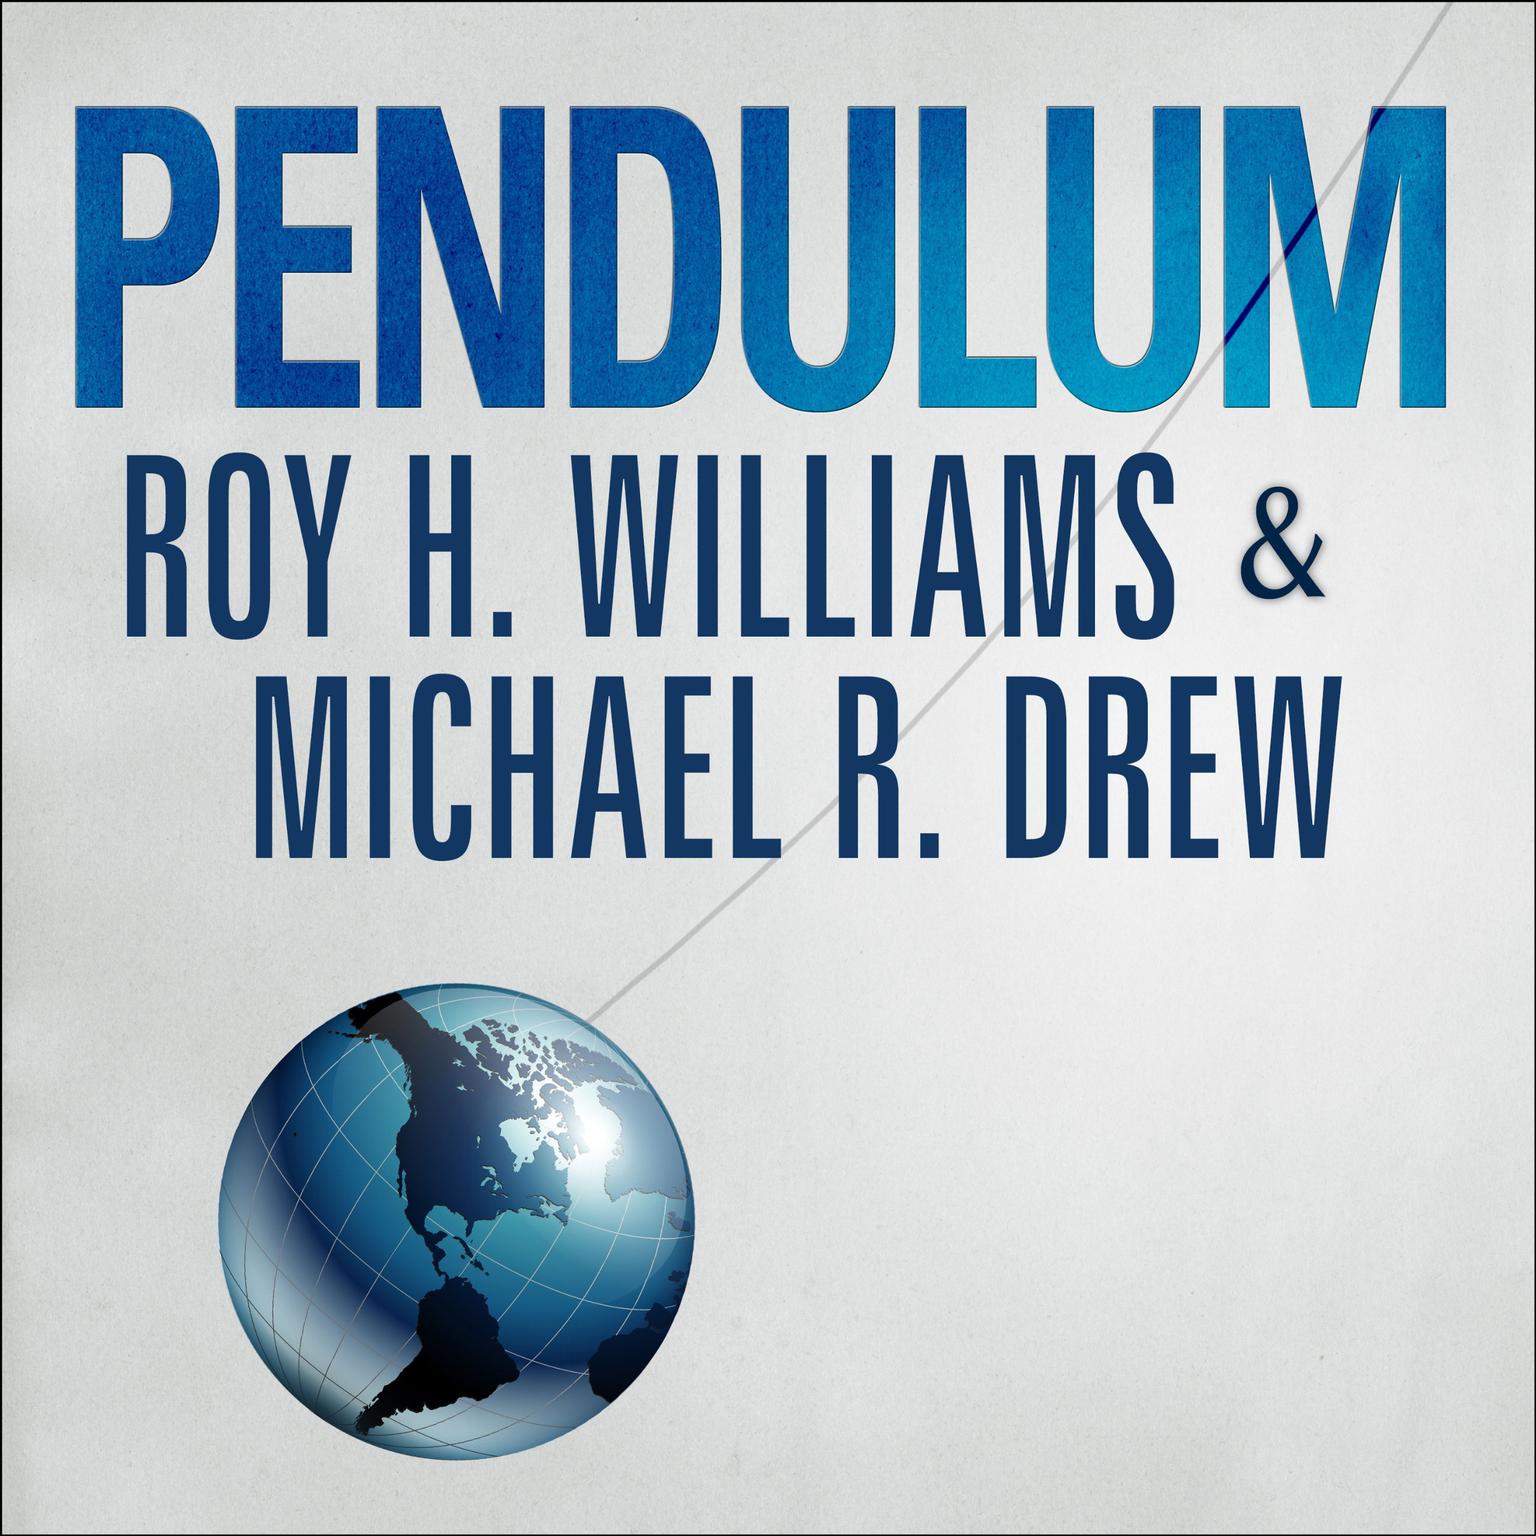 Pendulum: How Past Generations Shape Our Present and Predict Our Future Audiobook, by Michael R. Drew